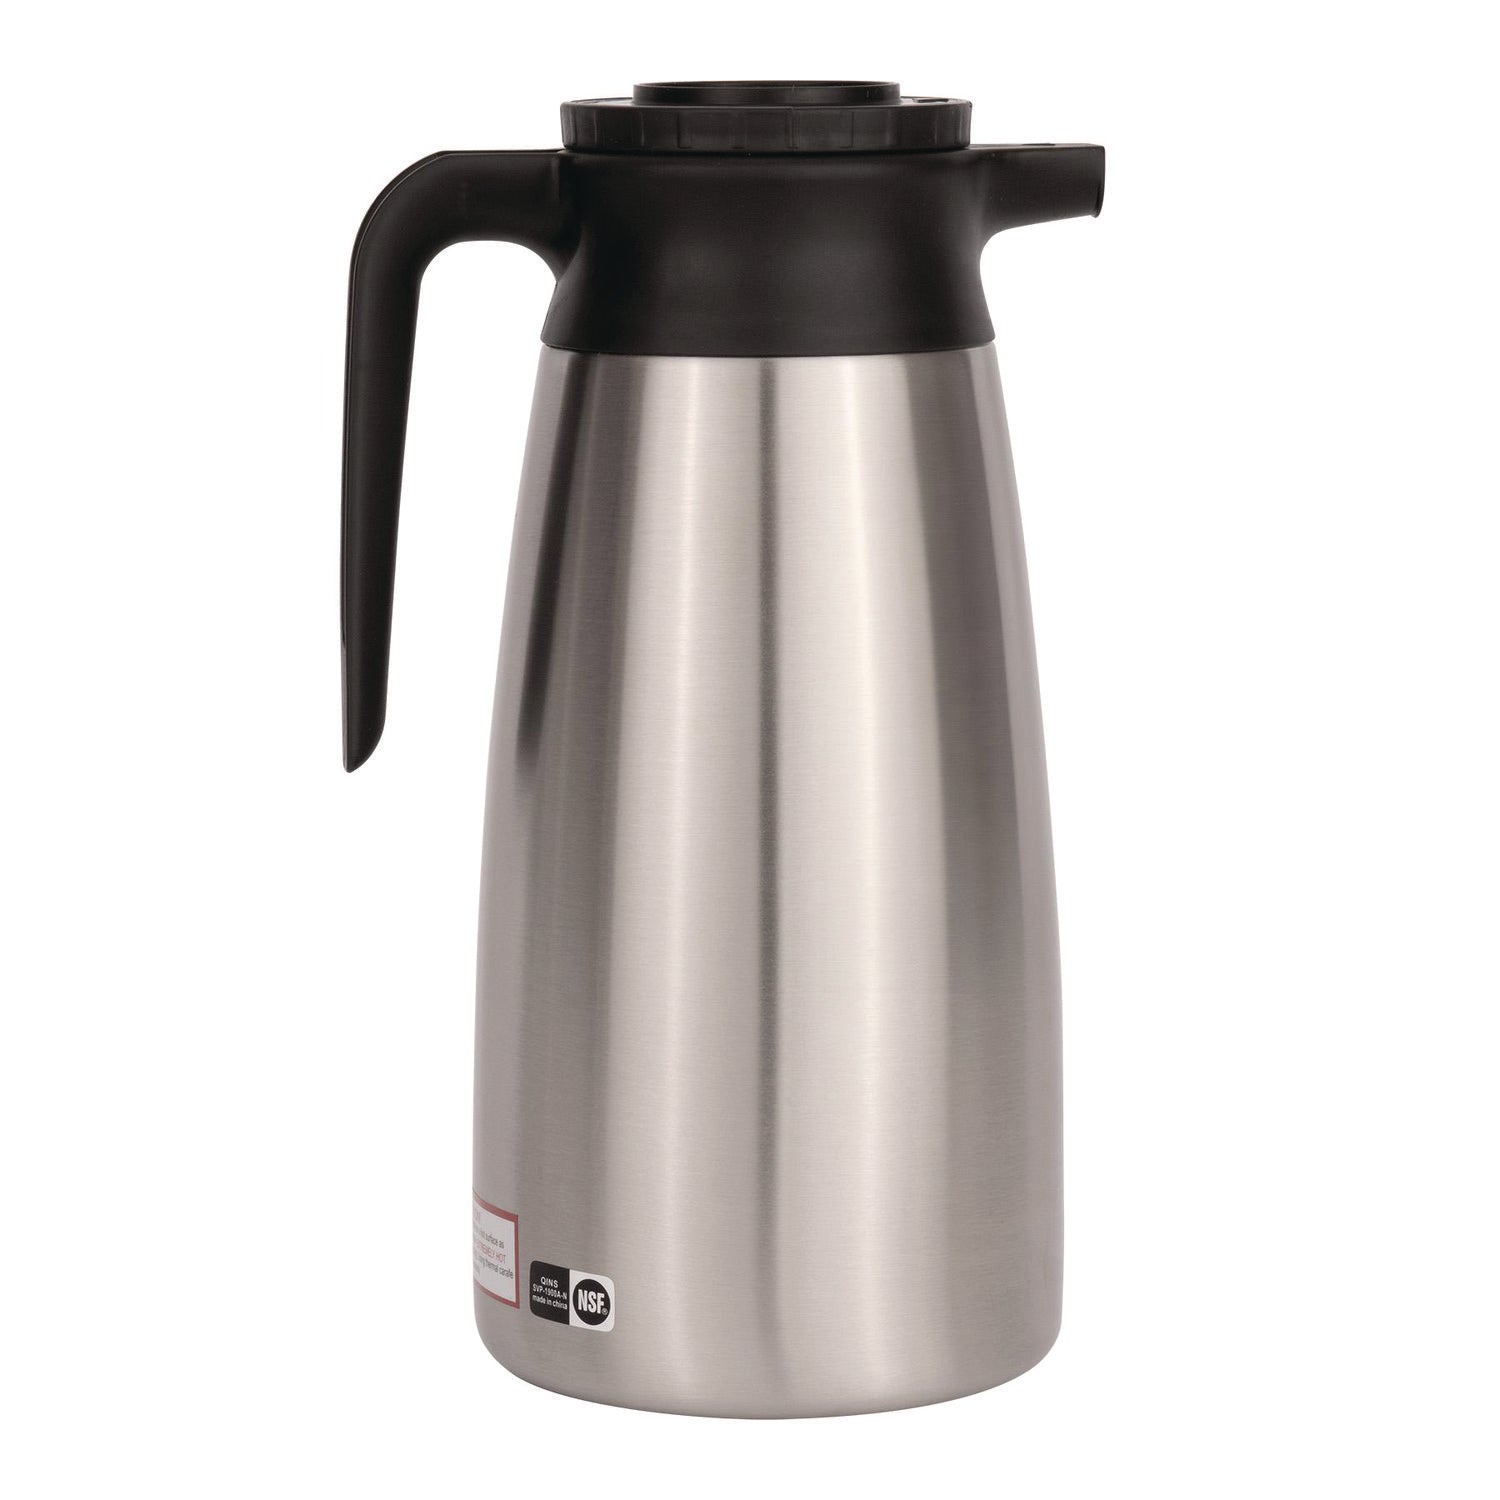 1.9 Liter Thermal Pitcher, Stainless Steel/Black - 2